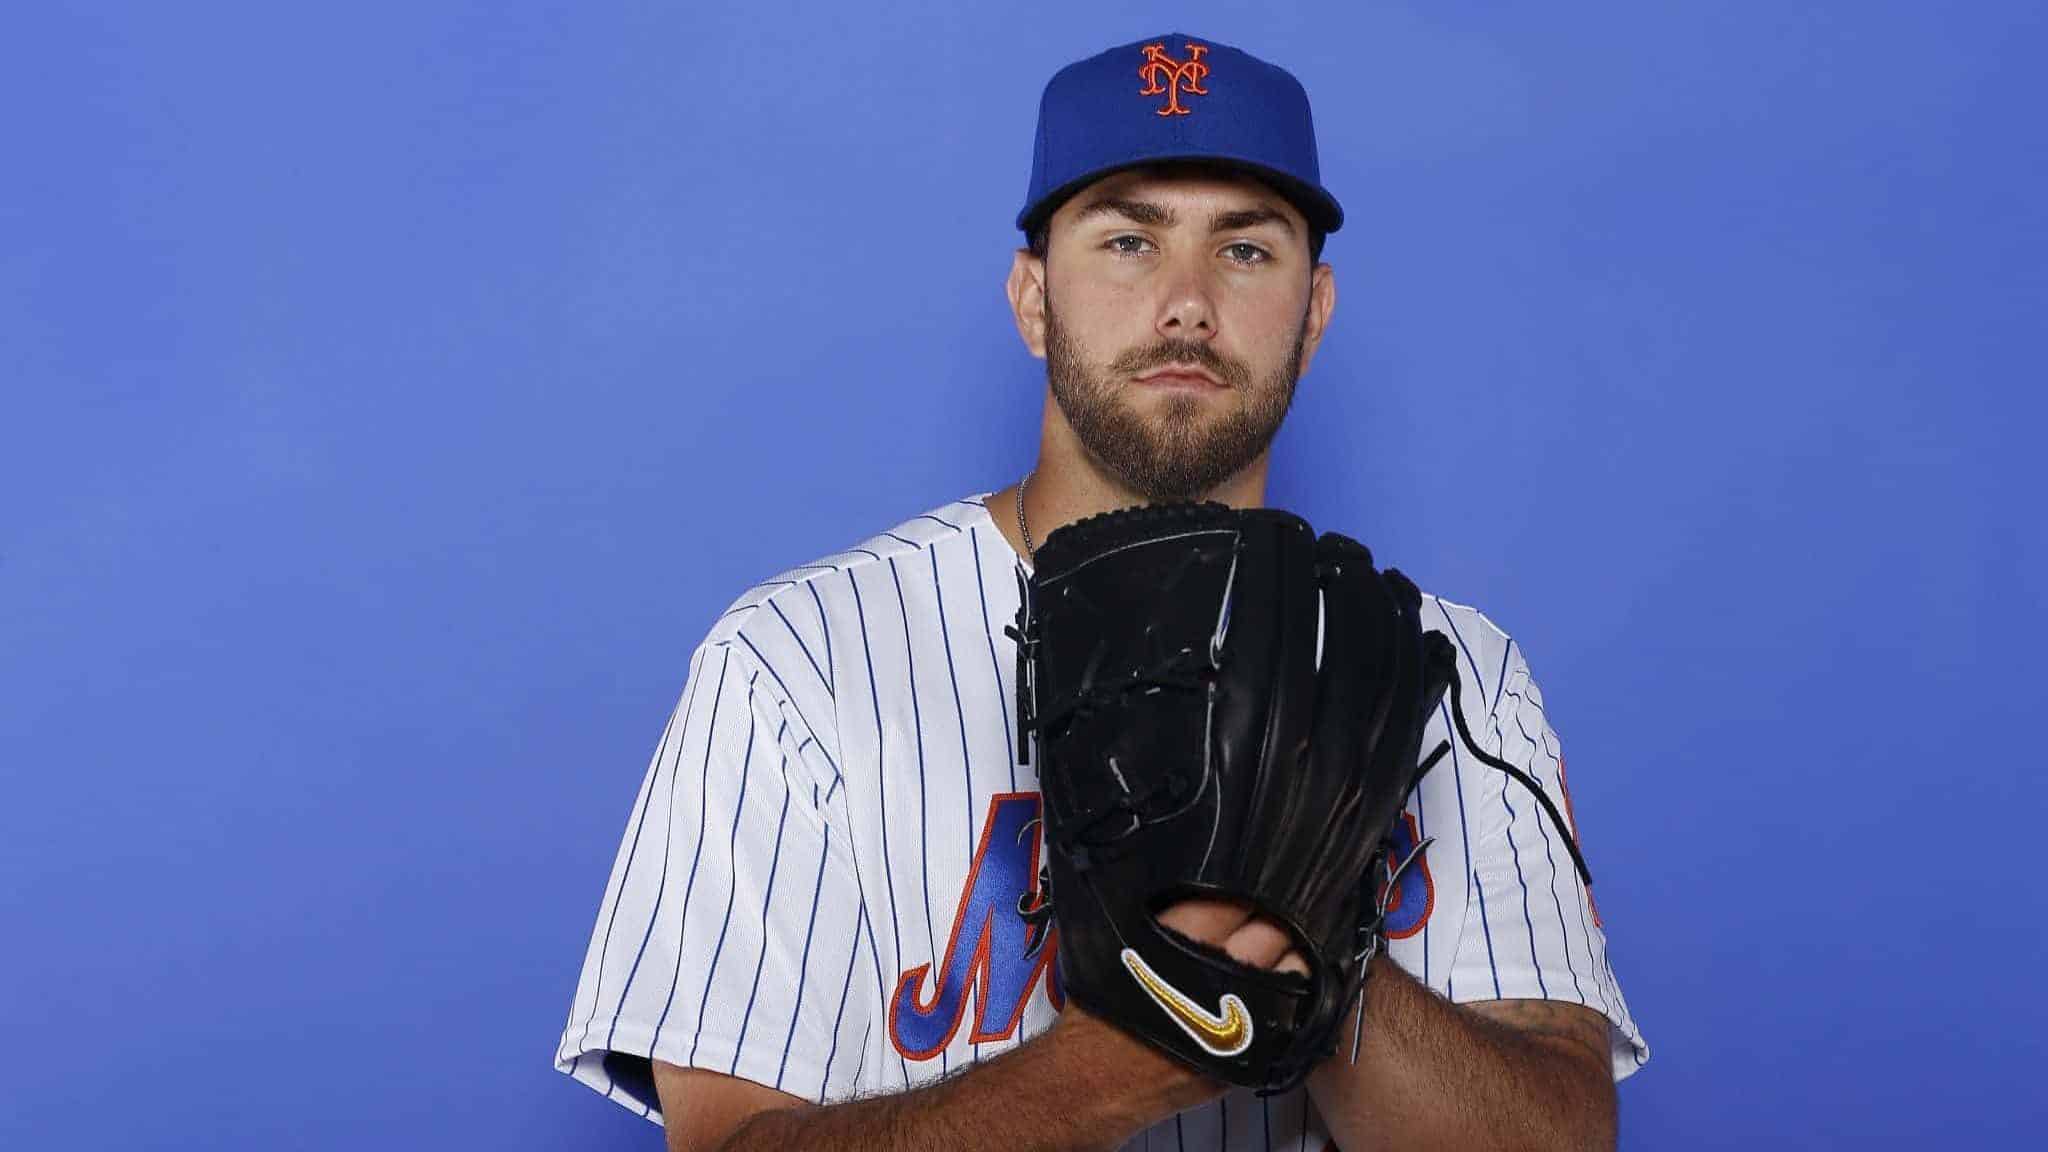 PORT ST. LUCIE, FLORIDA - FEBRUARY 21: David Peterson #77 of the New York Mets poses for a photo on Photo Day at First Data Field on February 21, 2019 in Port St. Lucie, Florida.